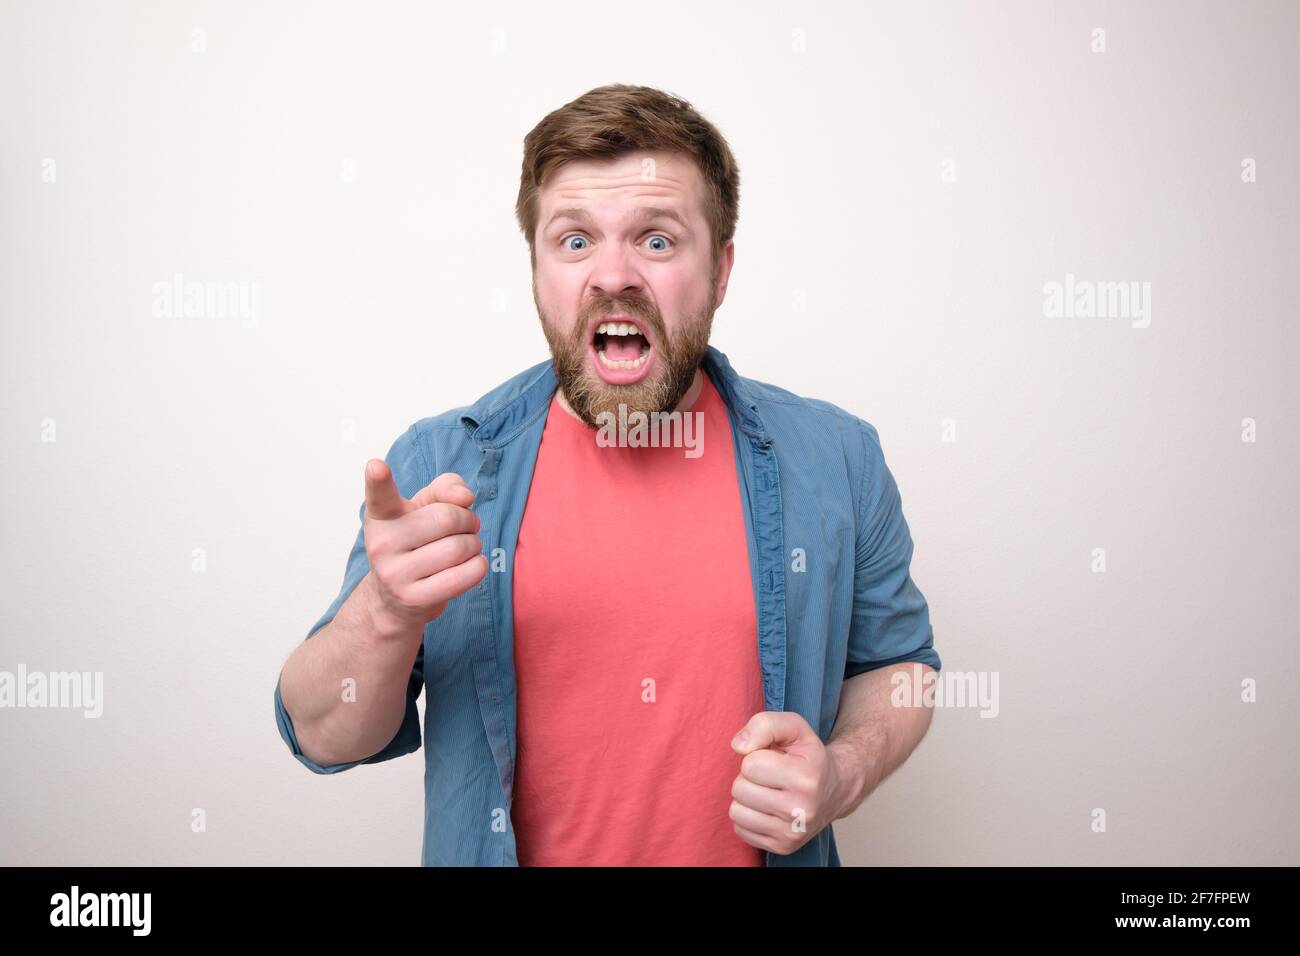 Aggressive bearded man yells and reproaches someone, he looks viciously, points his finger and blames. White background. Stock Photo